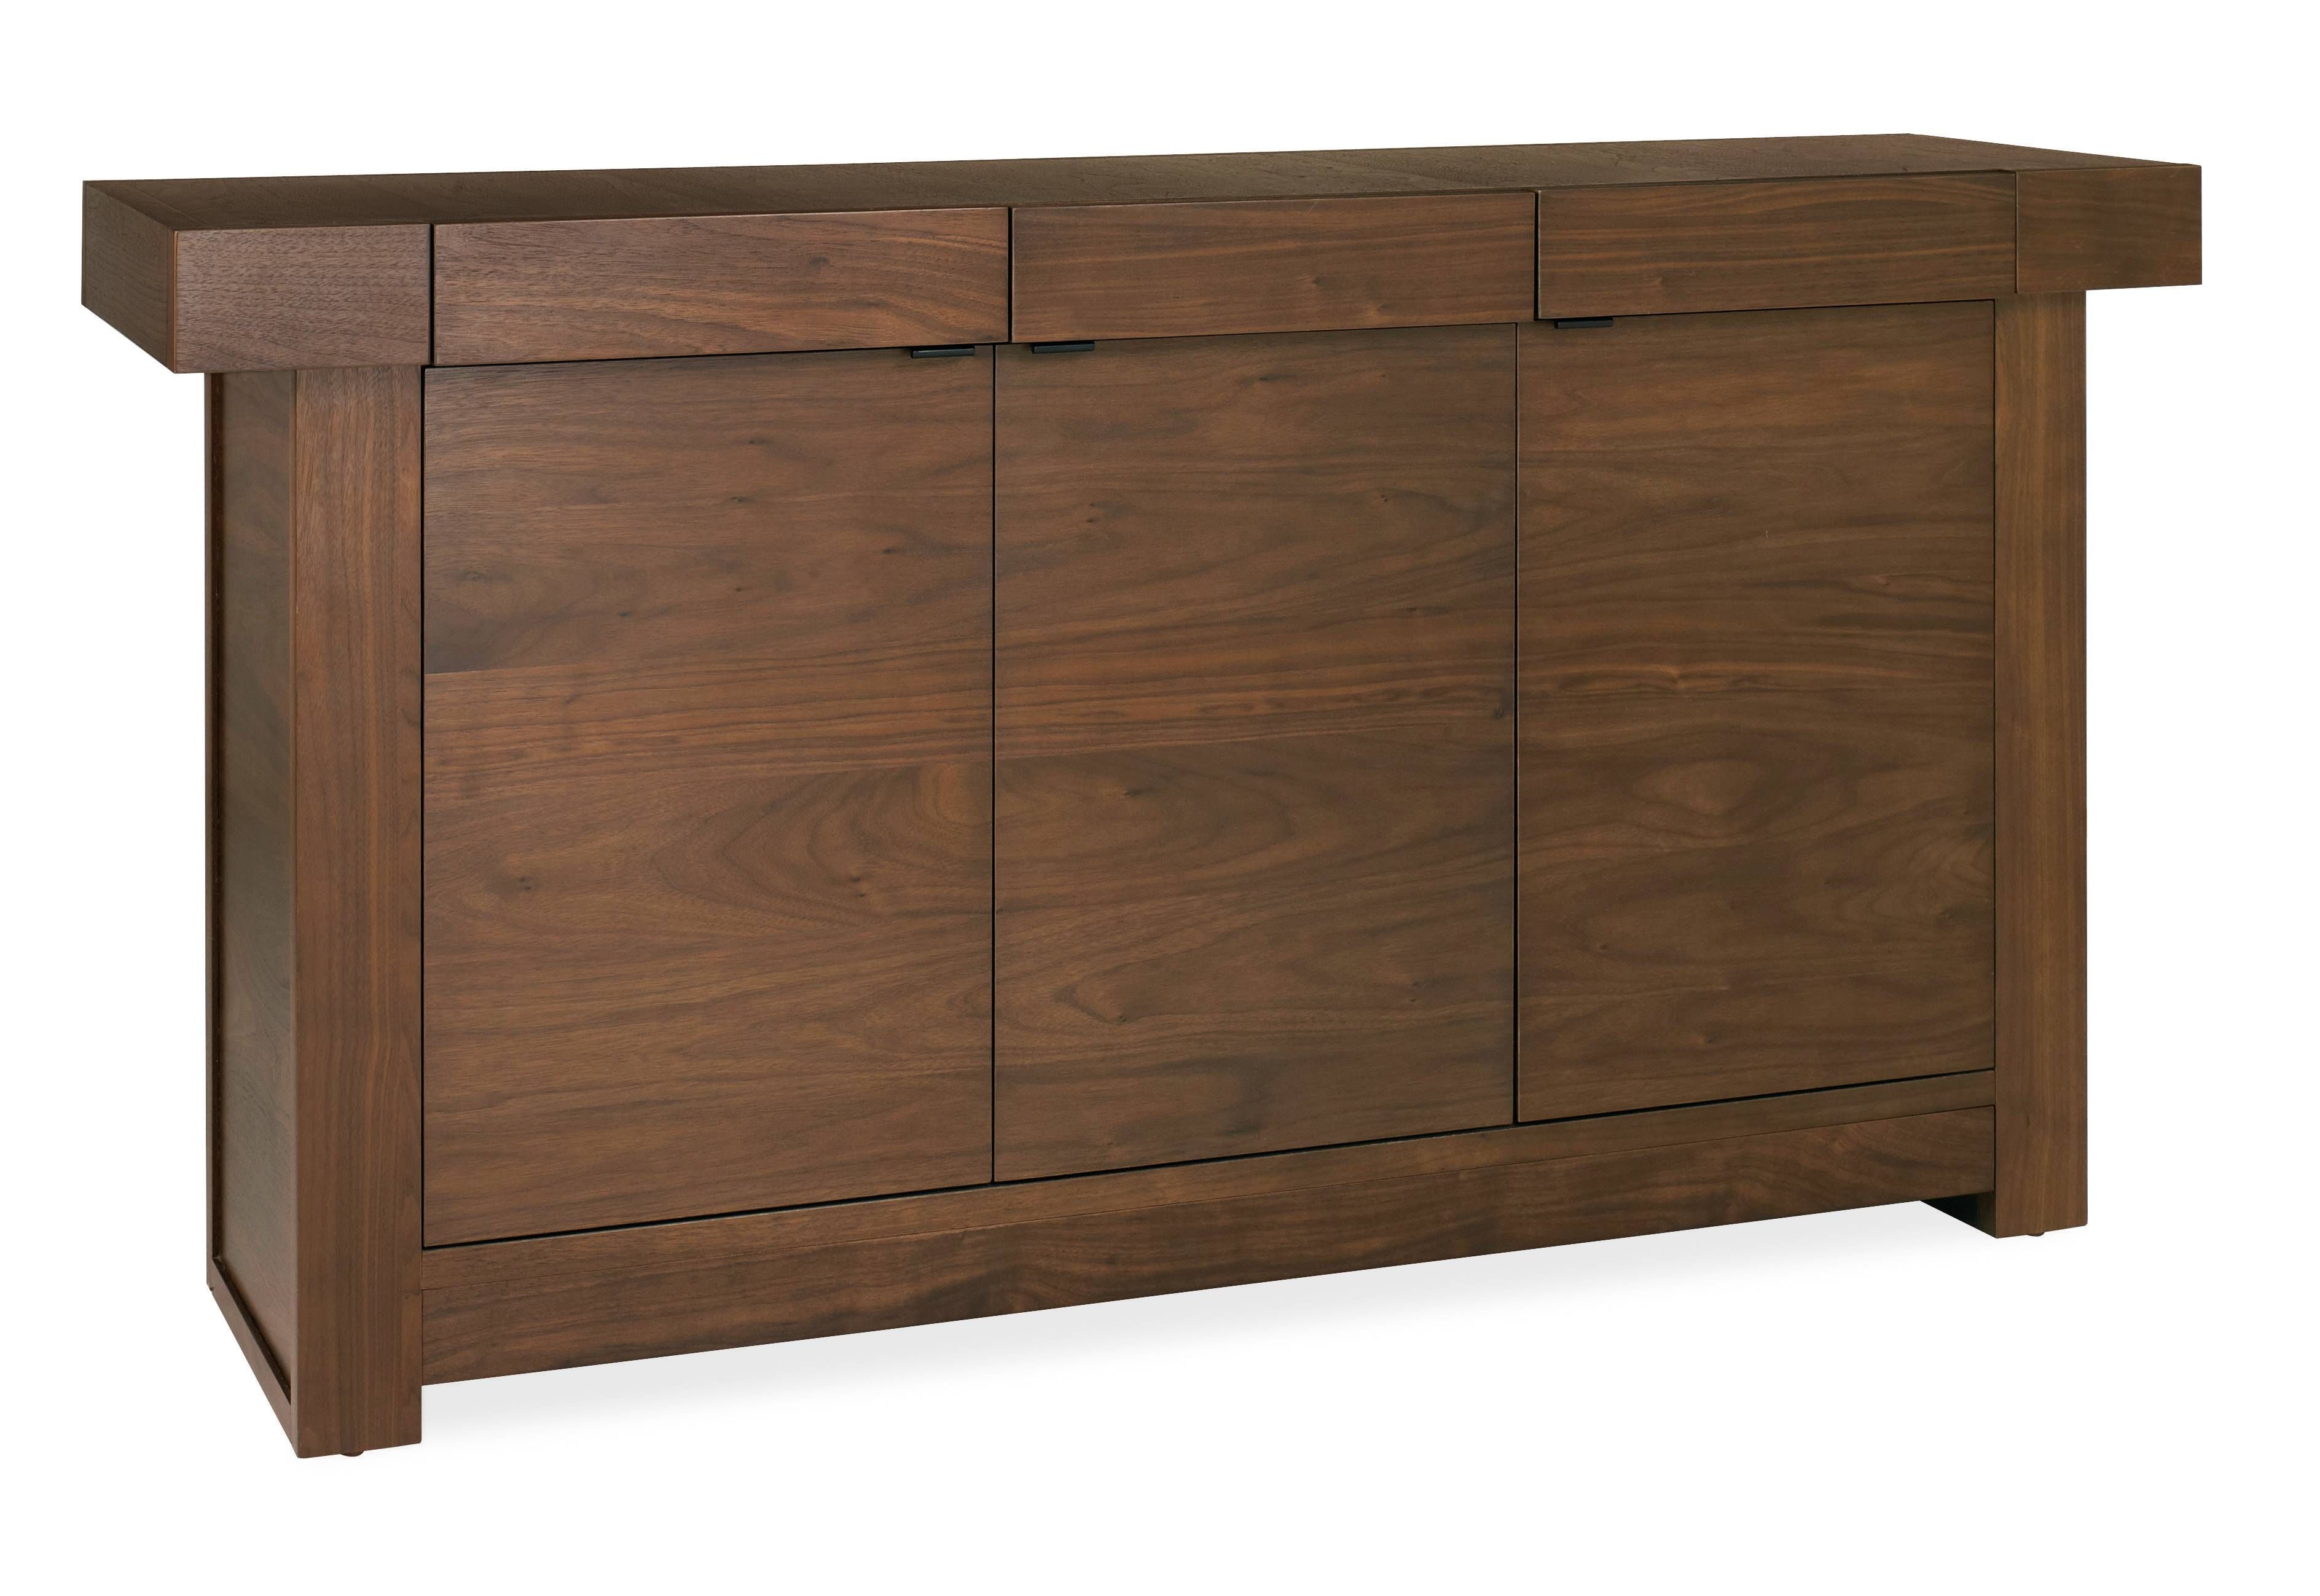 Akita Walnut Wide Sideboard | Oak Furniture Solutions With Most Popular Walnut Sideboards (View 13 of 15)